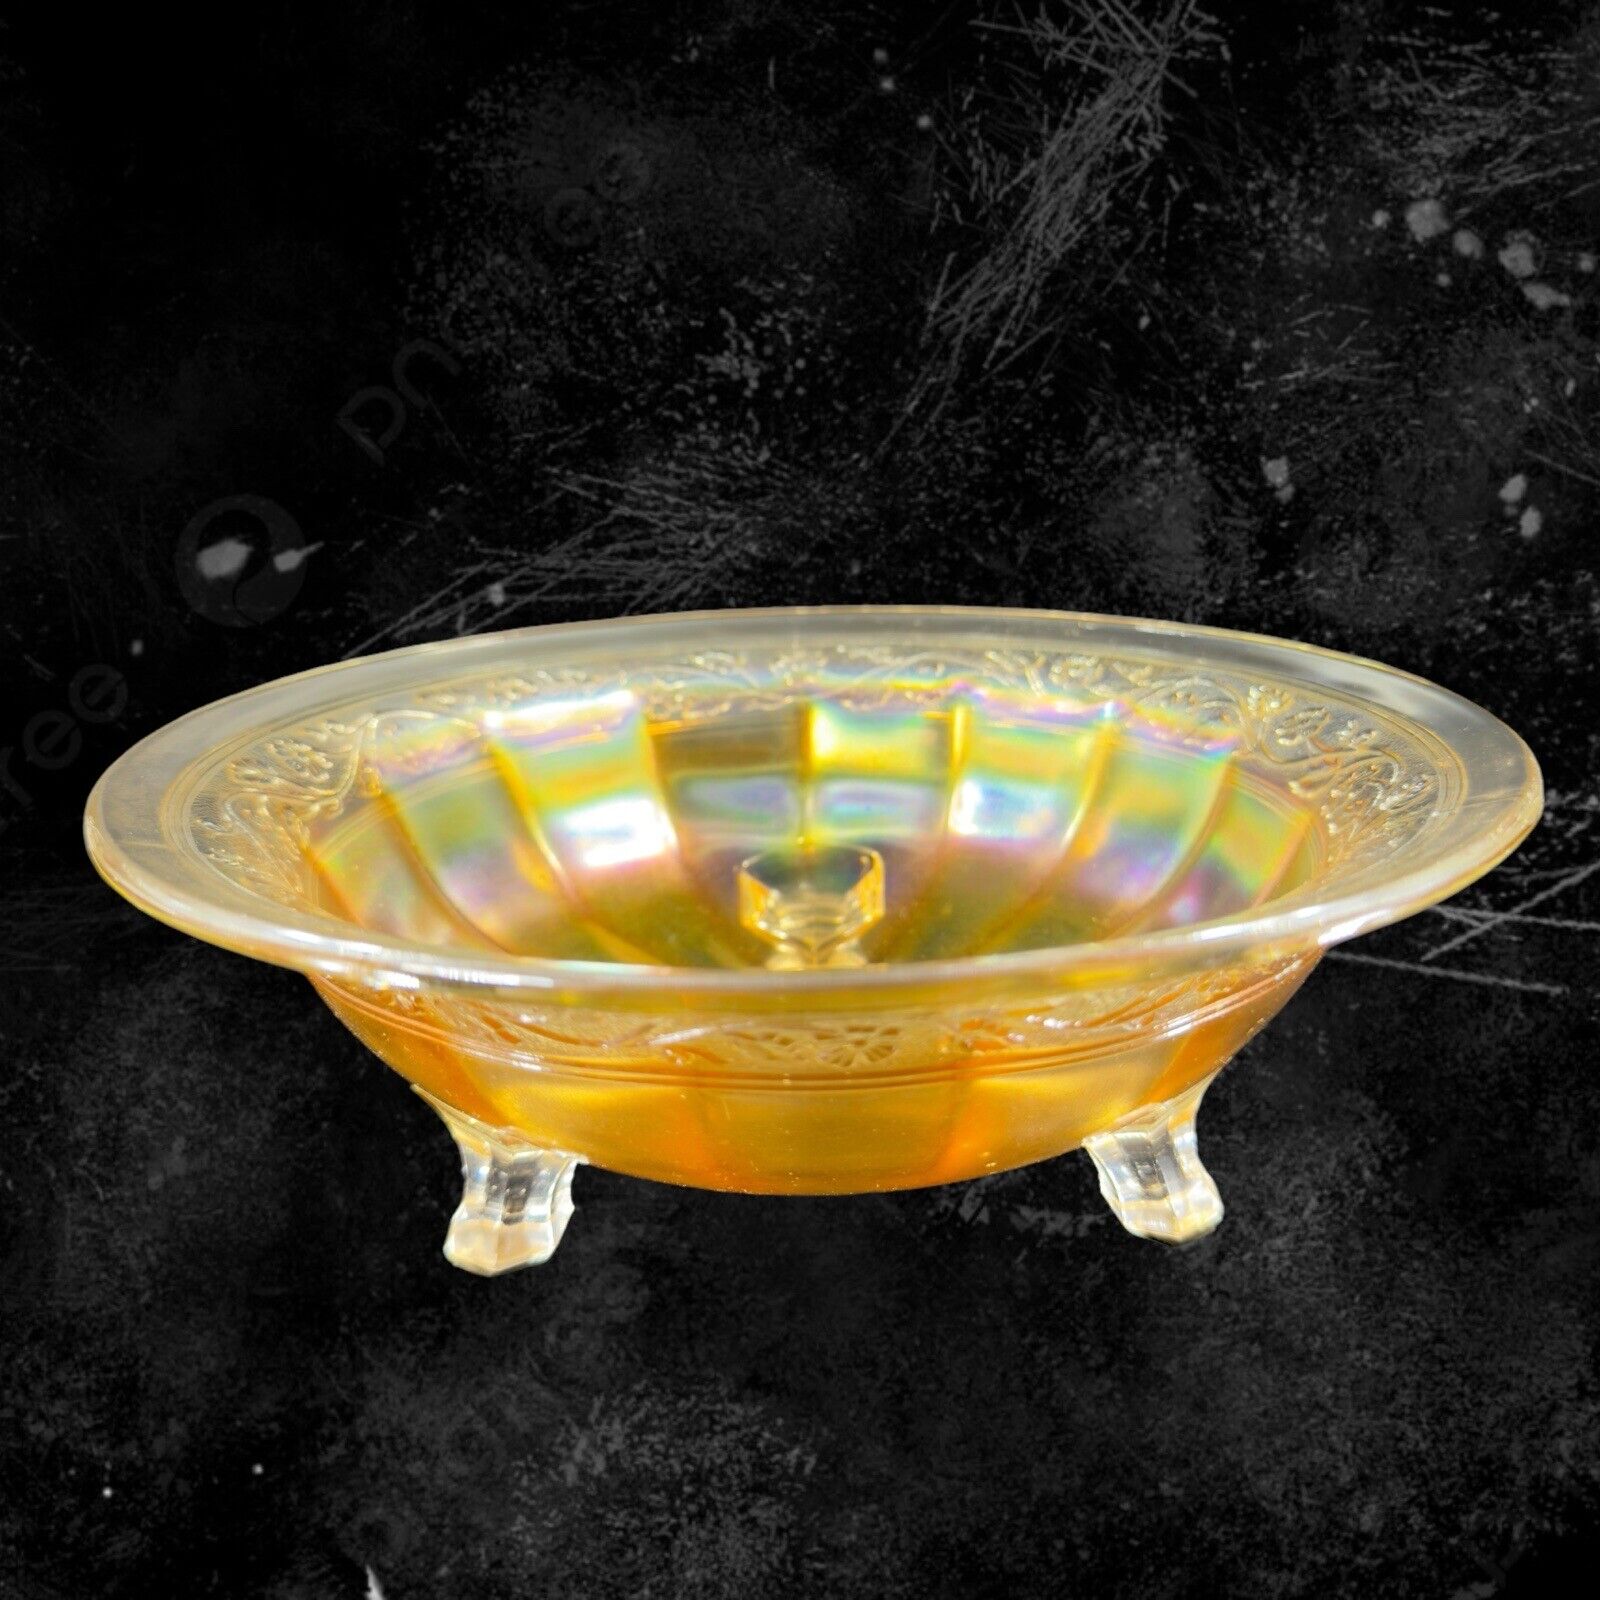 Vintage Marigold Carnival Glass Footed Dish Bowl Iridescent Finish Glass Decor